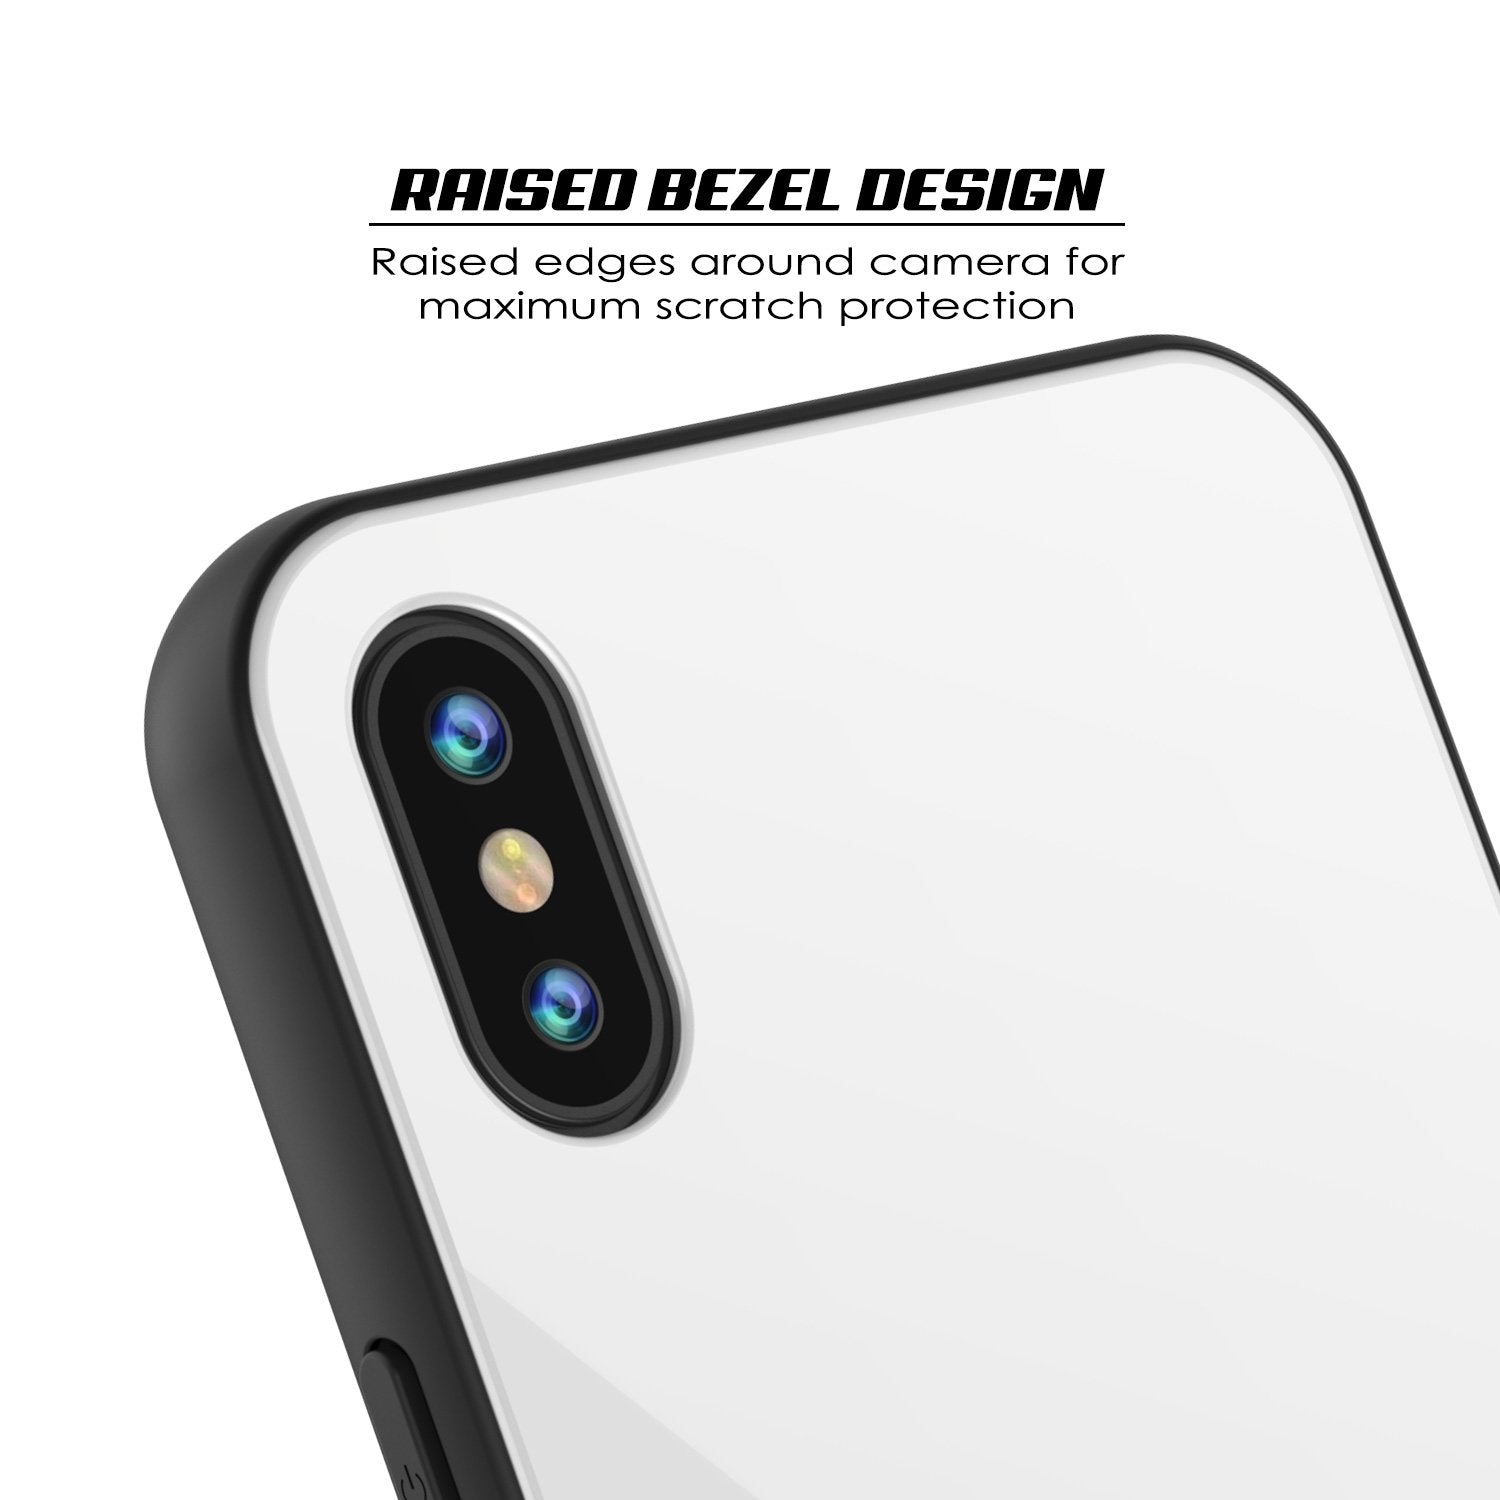 iPhone X Case, Punkcase GlassShield Ultra Thin Protective 9H Full Body Tempered Glass Cover W/ Drop Protection & Non Slip Grip for Apple iPhone 10 [White] - PunkCase NZ